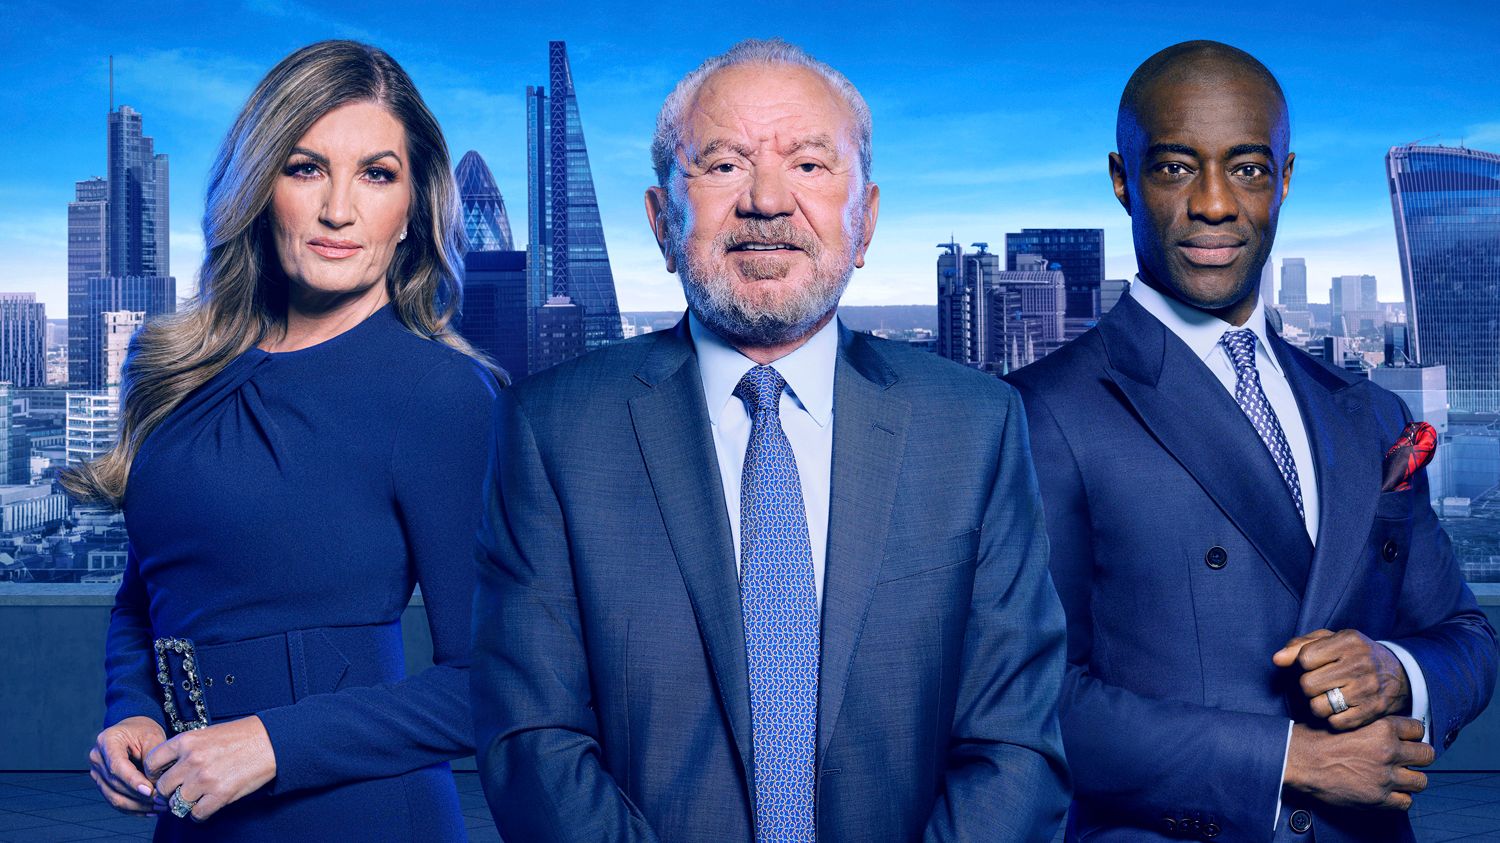 The Apprentice: When does the new series start?